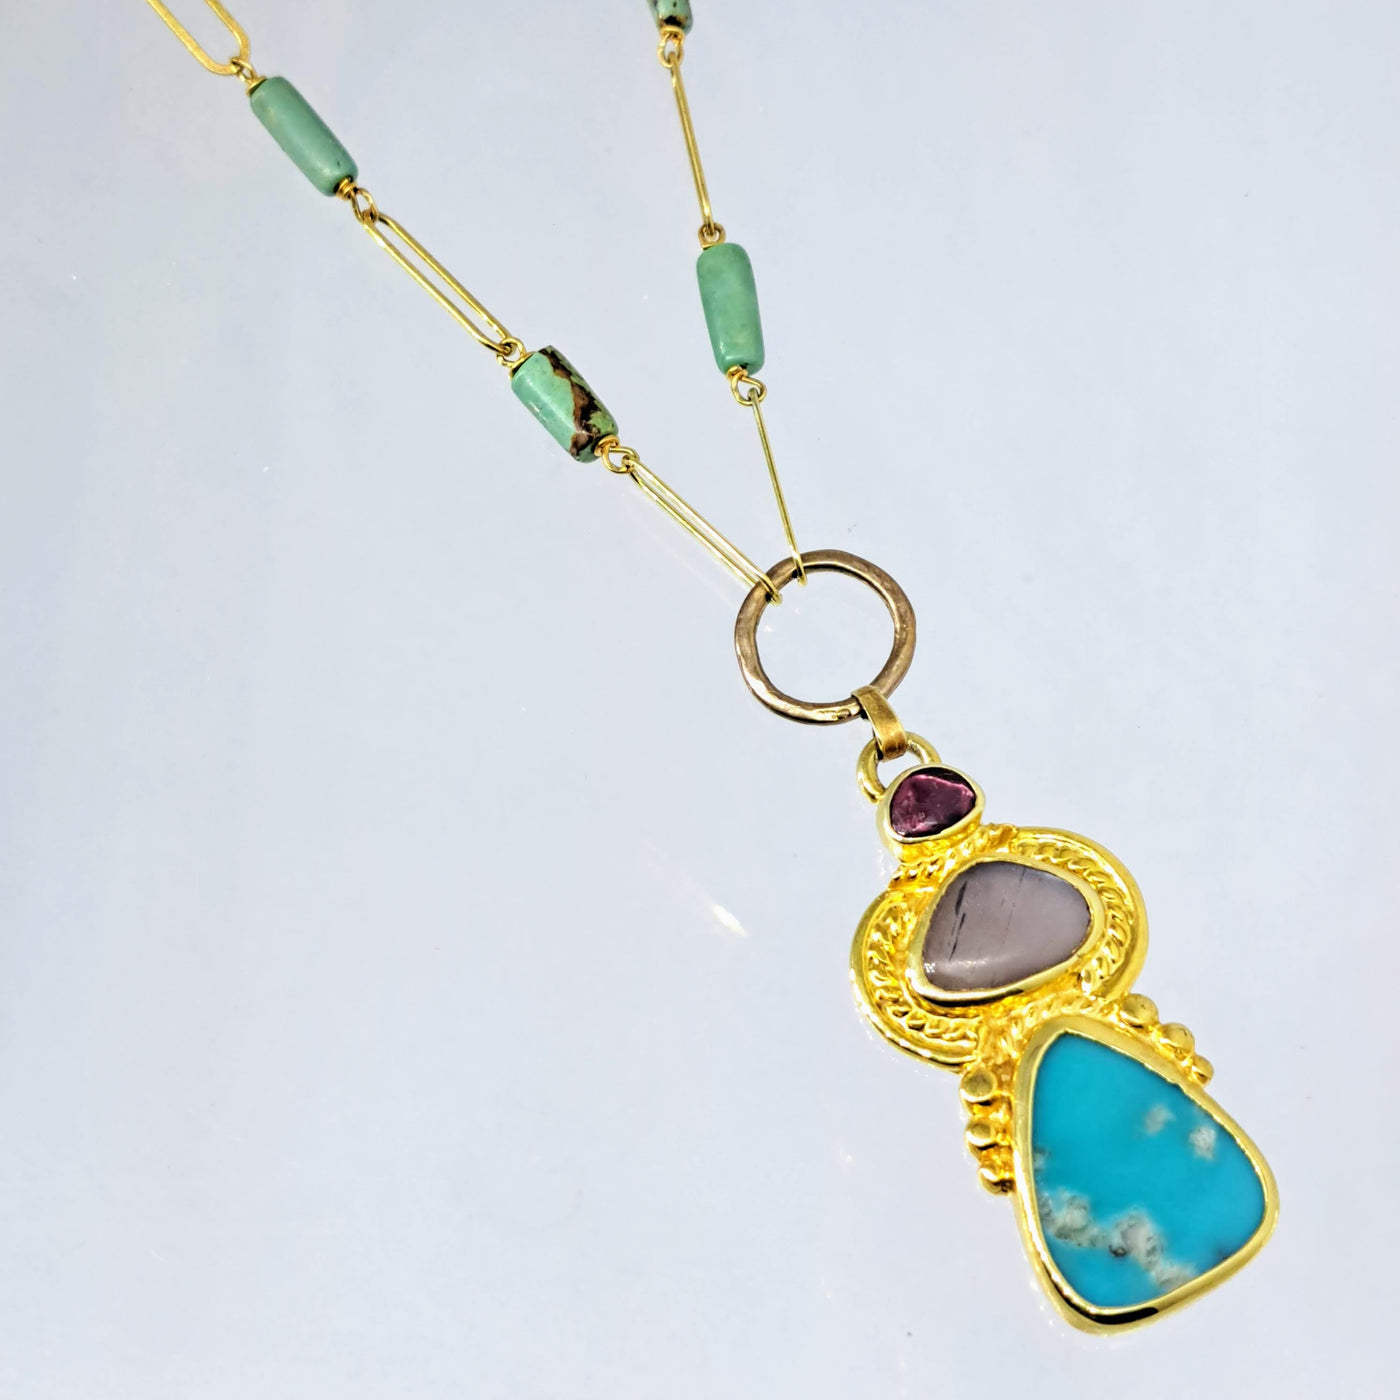 "Empress" 18" Necklace (2.25" Pendant) - Turquoise, Pink Tourmaline, Grey Moonstone, Gold Sterling